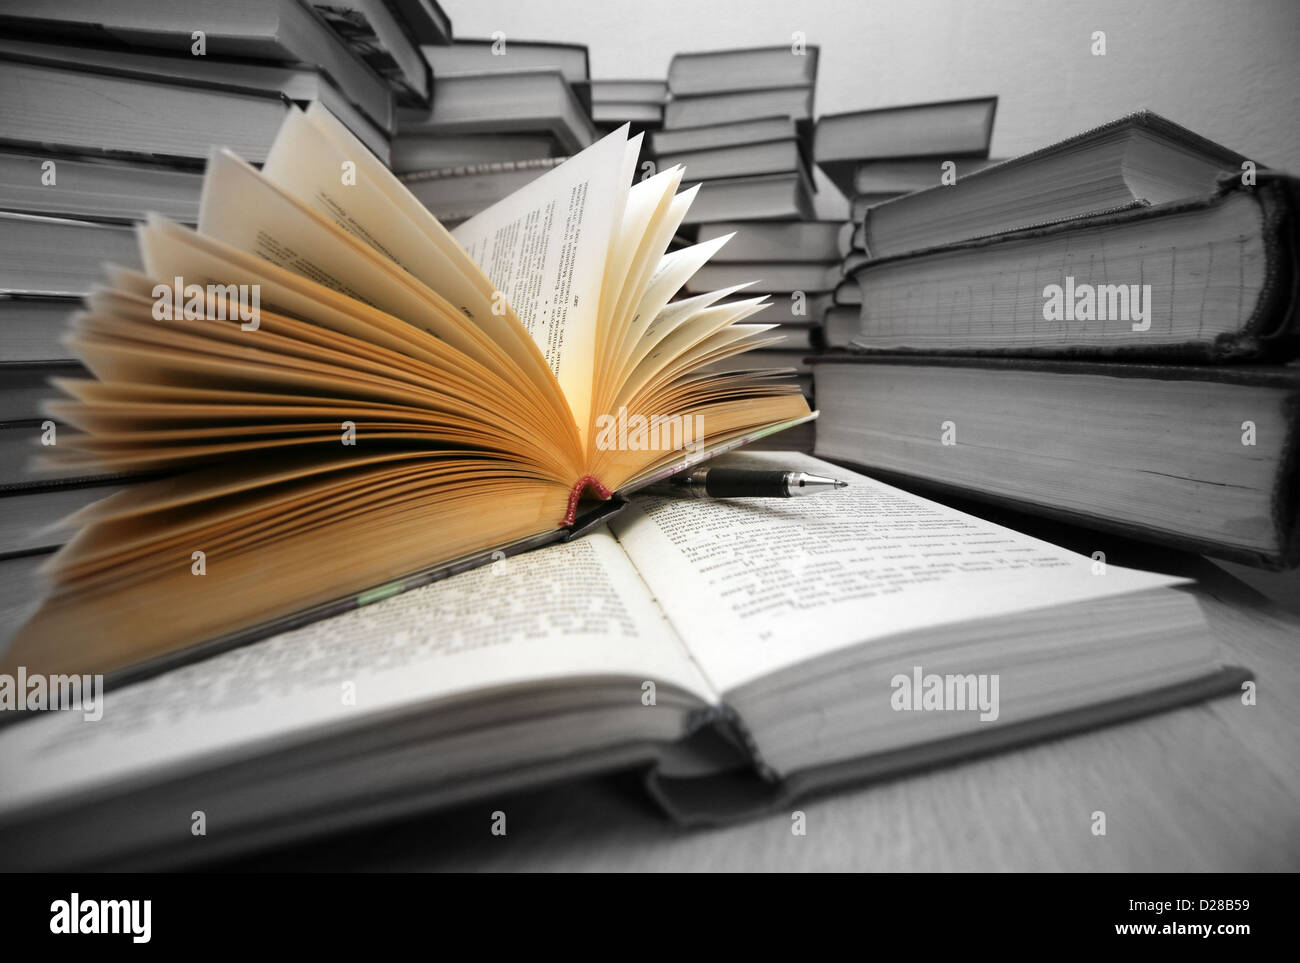 Many old books combined by a heap. Russian saying 'Knowledge - light, ignorance - darkness' Stock Photo